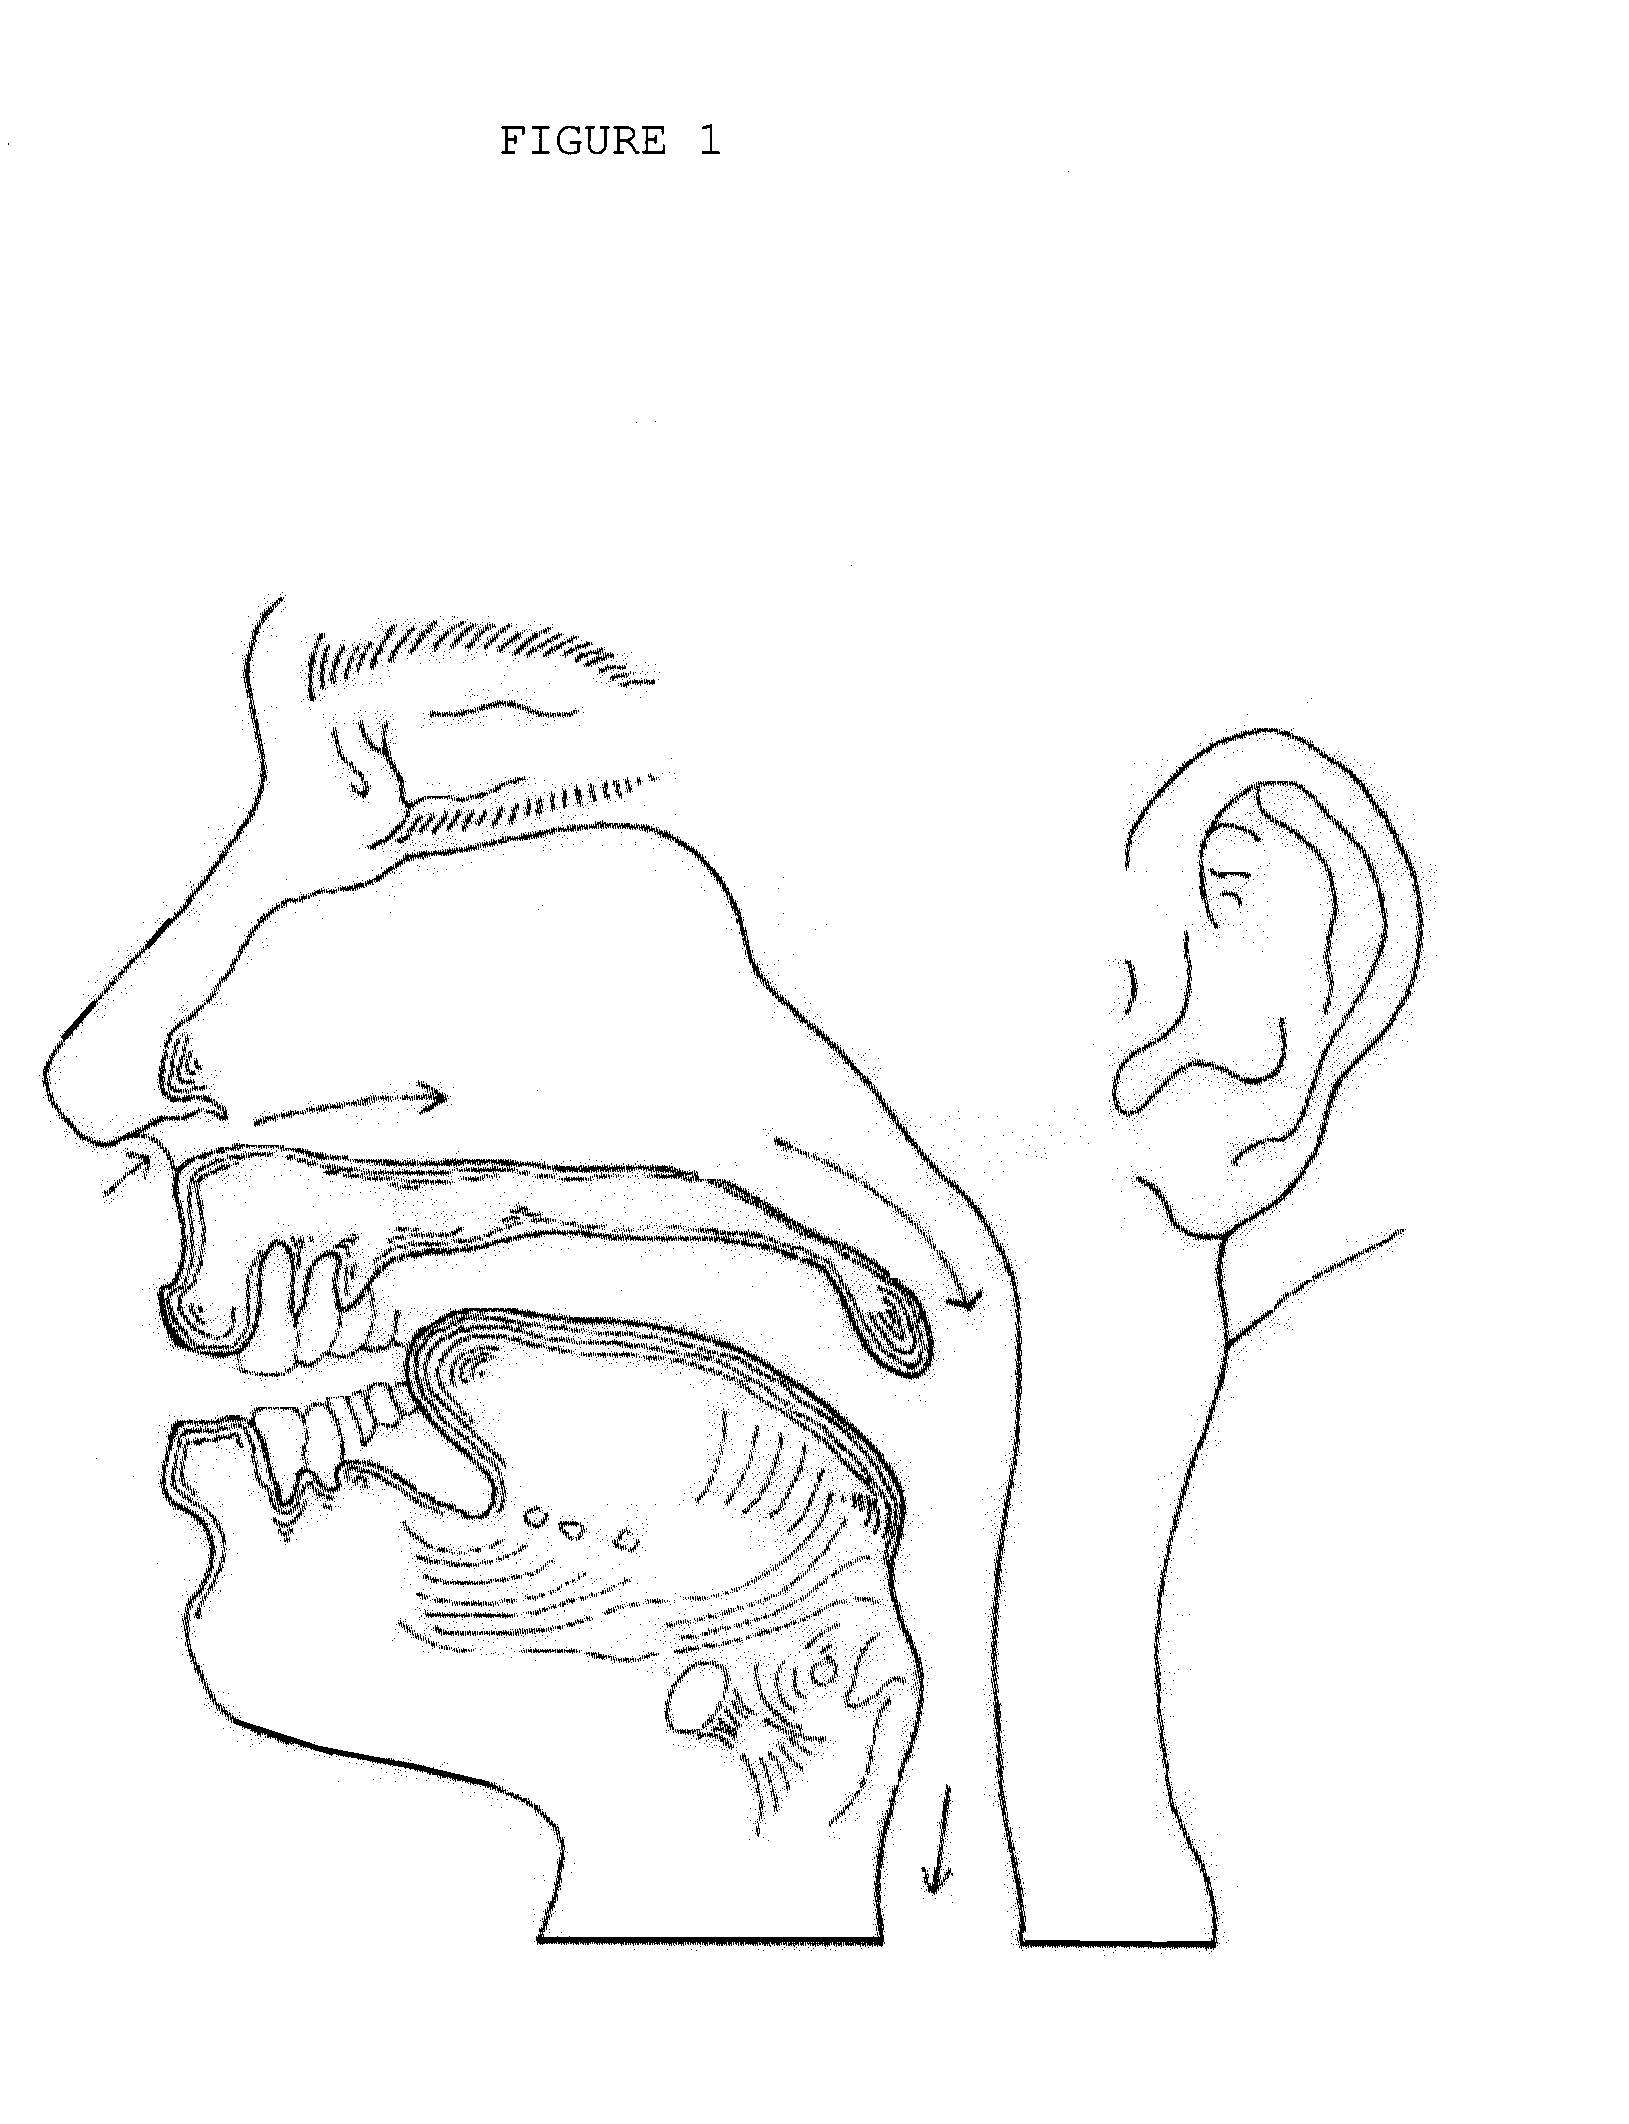 Integrated oral appliance for sleep-disordered breathing